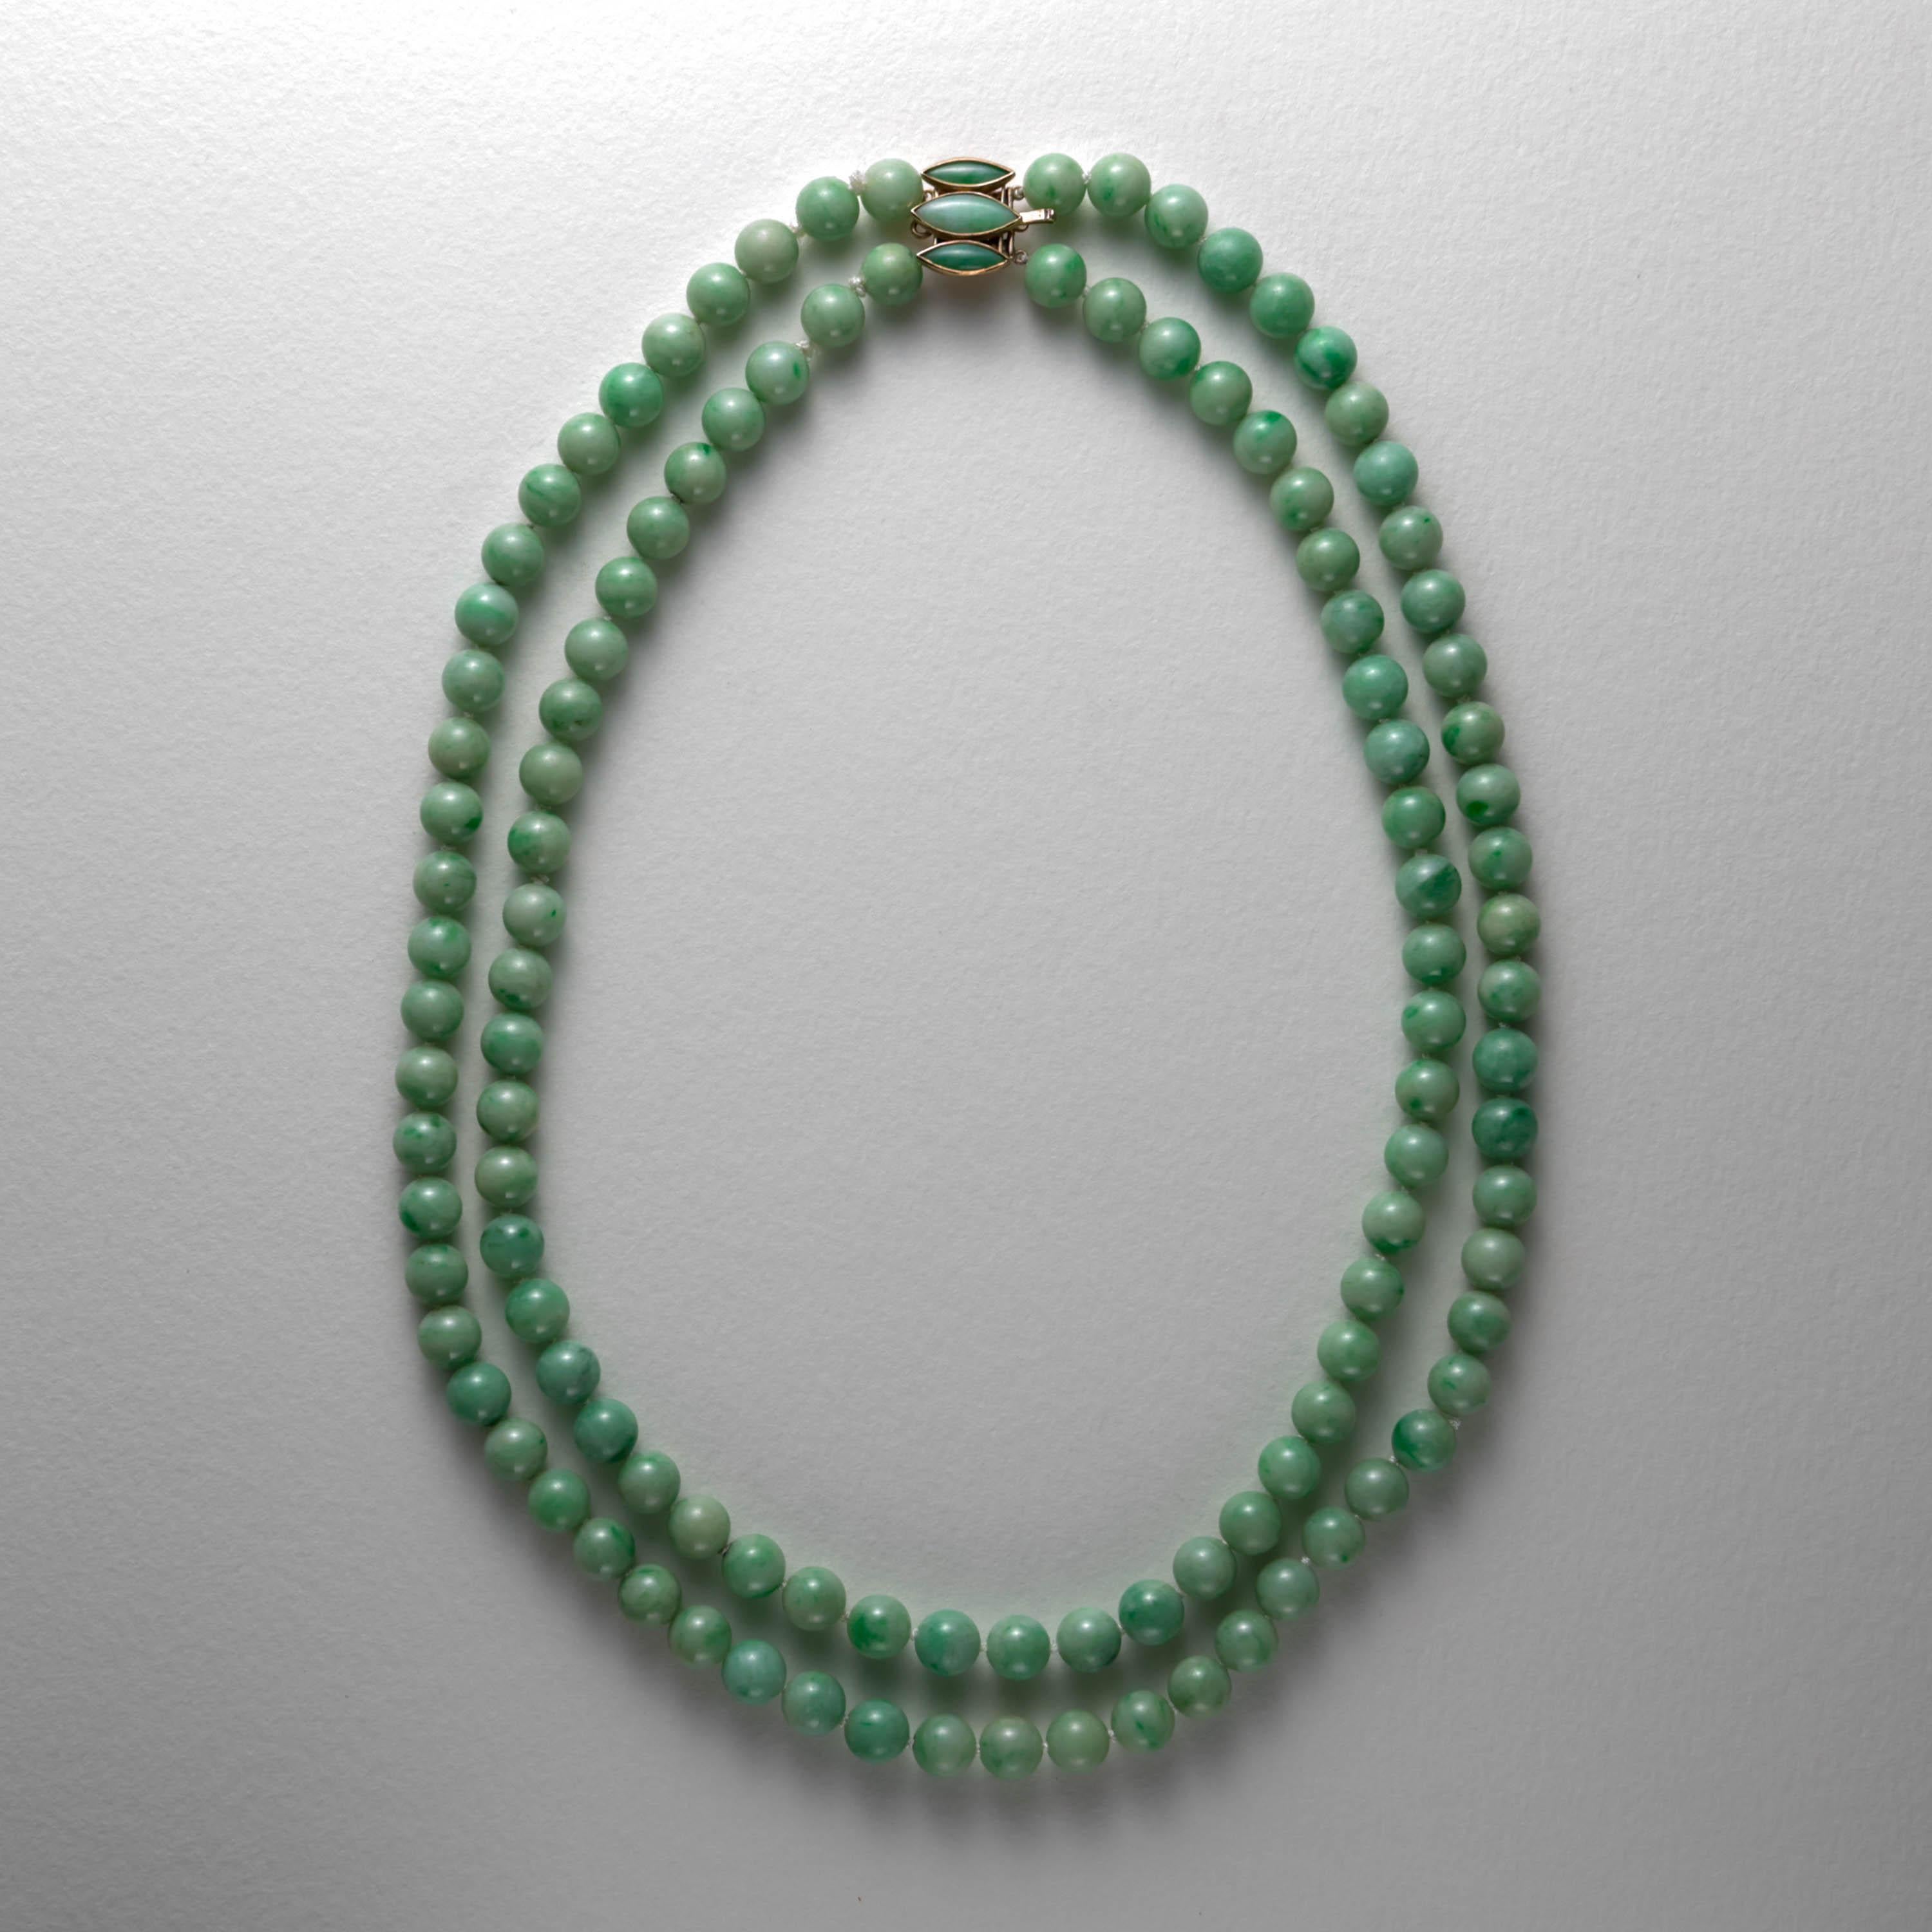 Grand, beautiful, and rare, this double-strand jade necklace features 114 approximately 9.5mm hand-carved and polished untreated Burmese jadeite beads. These are substantial, fine, old-school jade beads that are free from cracks, chips, or damage